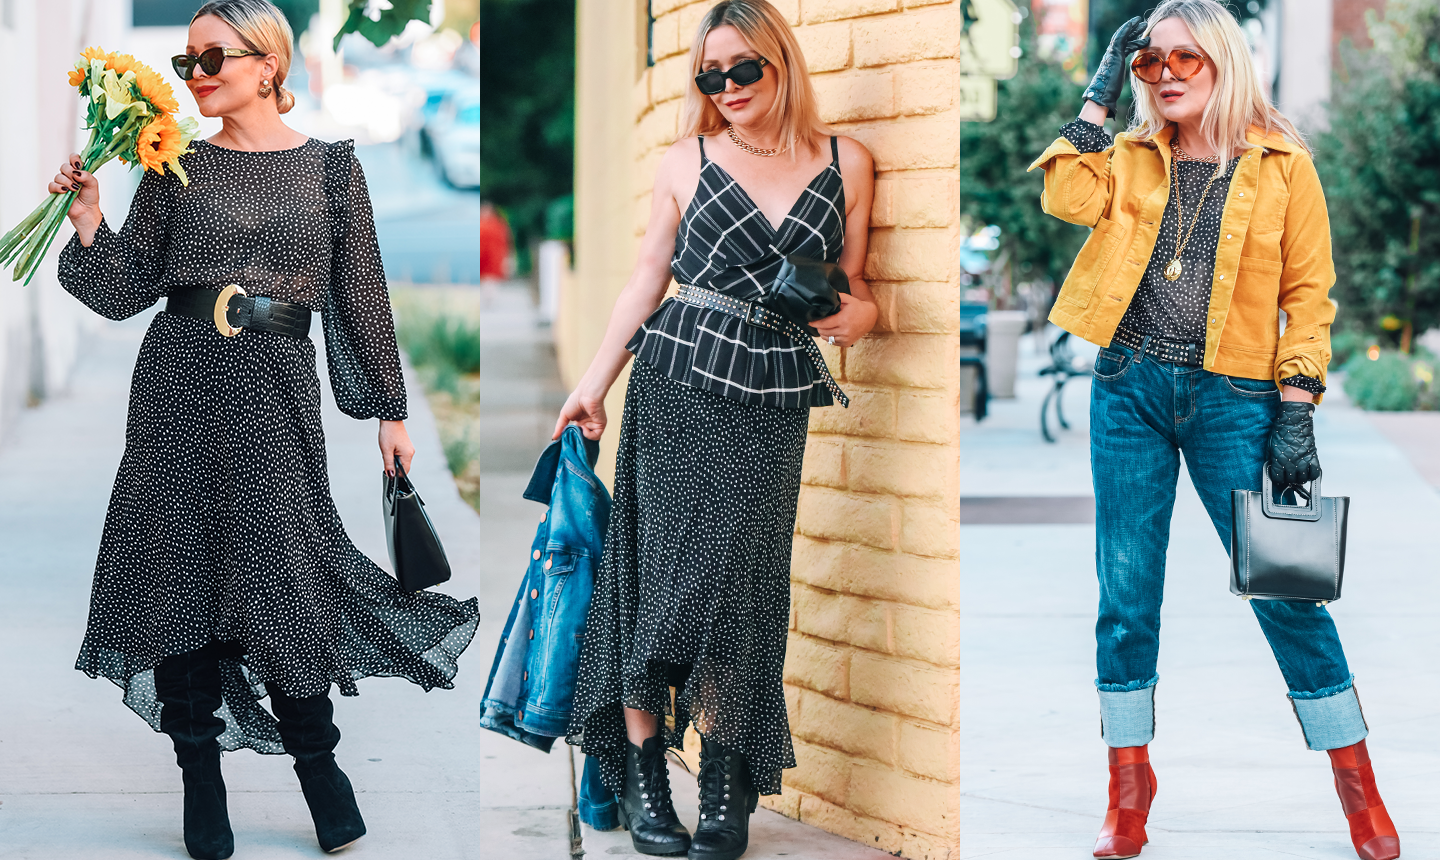 connect the dots: how to style polka dot outfits